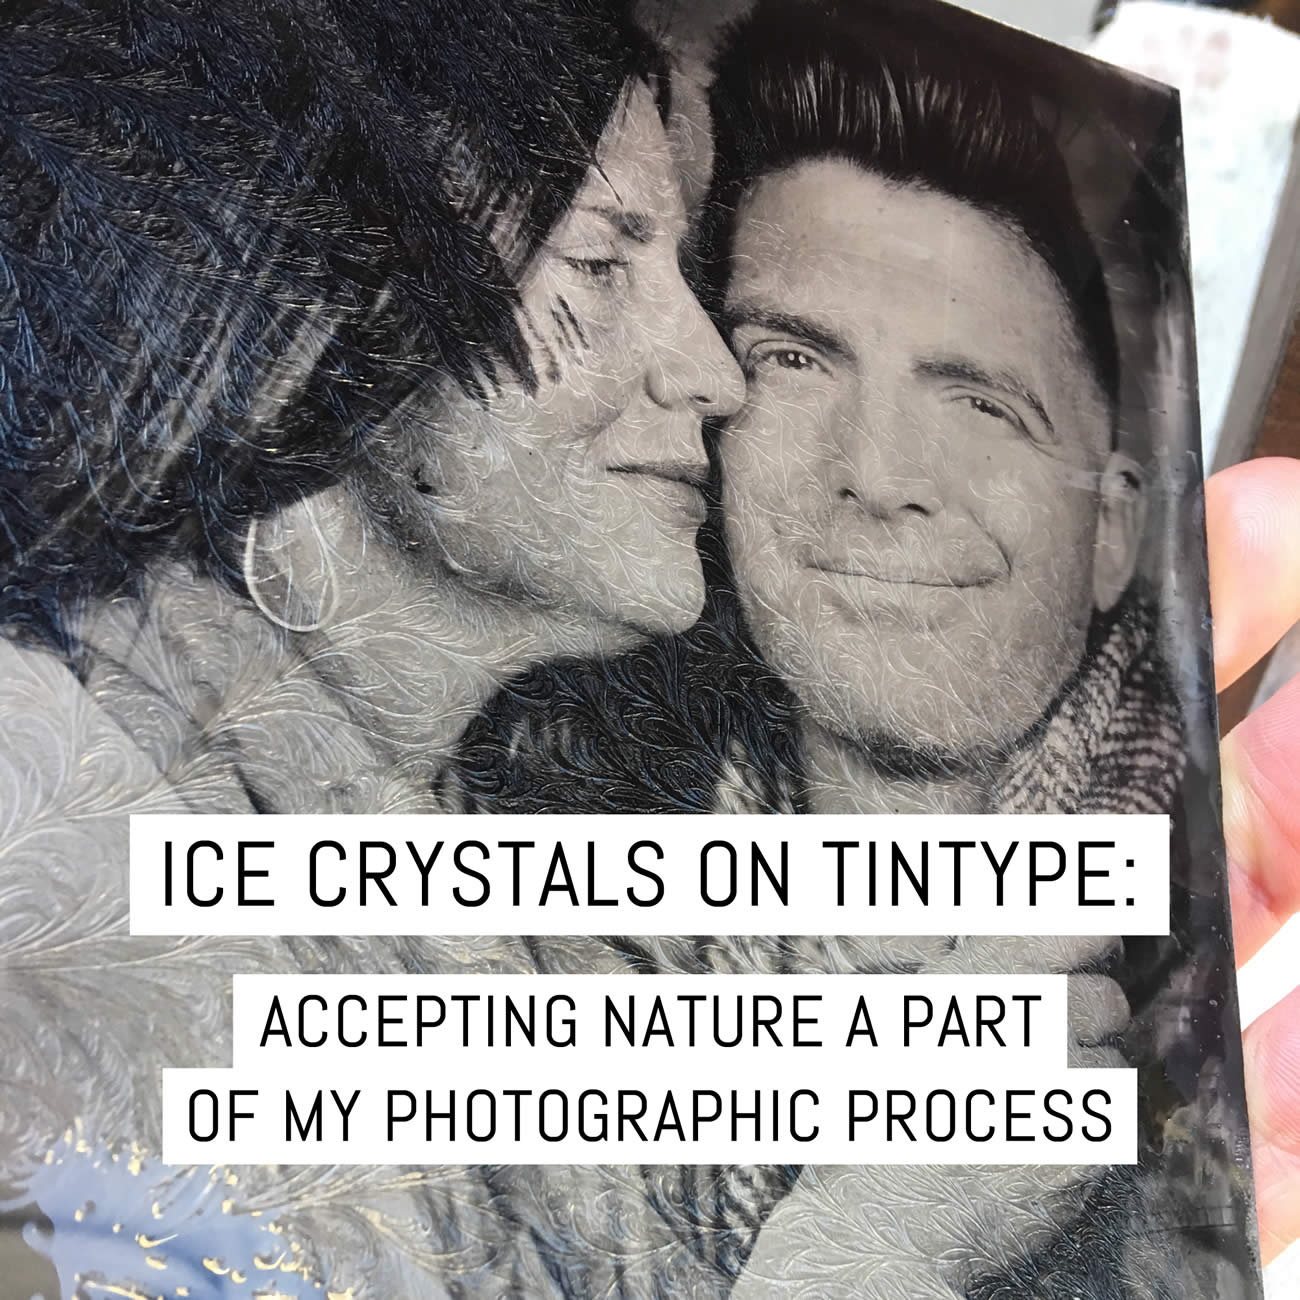 Ice crystals on tintype: making nature a part of my photographic process aka a song of ice then fire